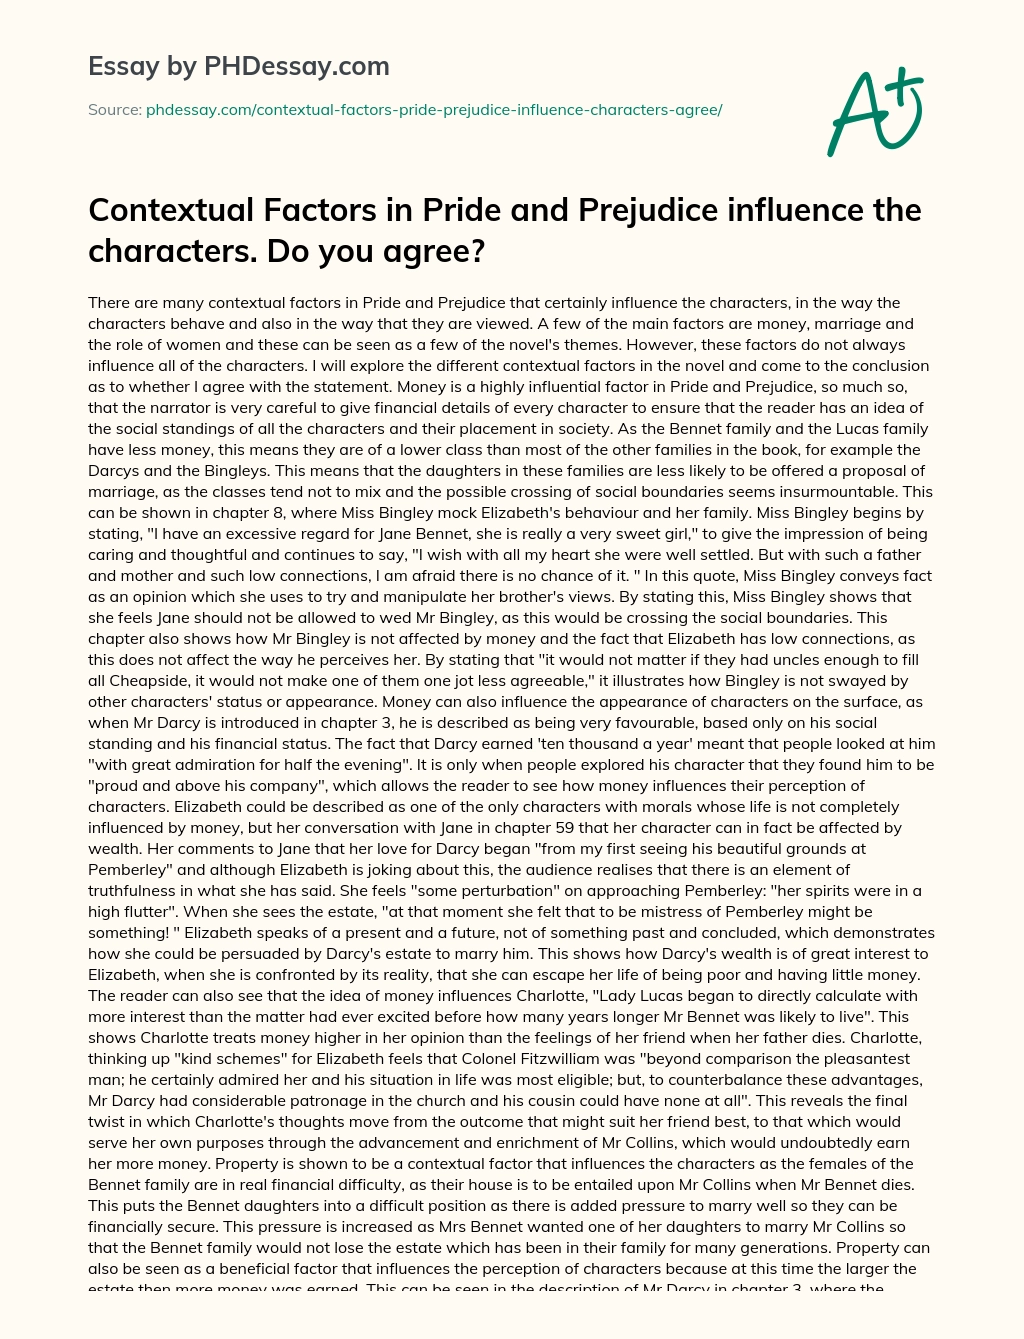 Contextual Factors in Pride and Prejudice influence the characters. Do you agree? essay